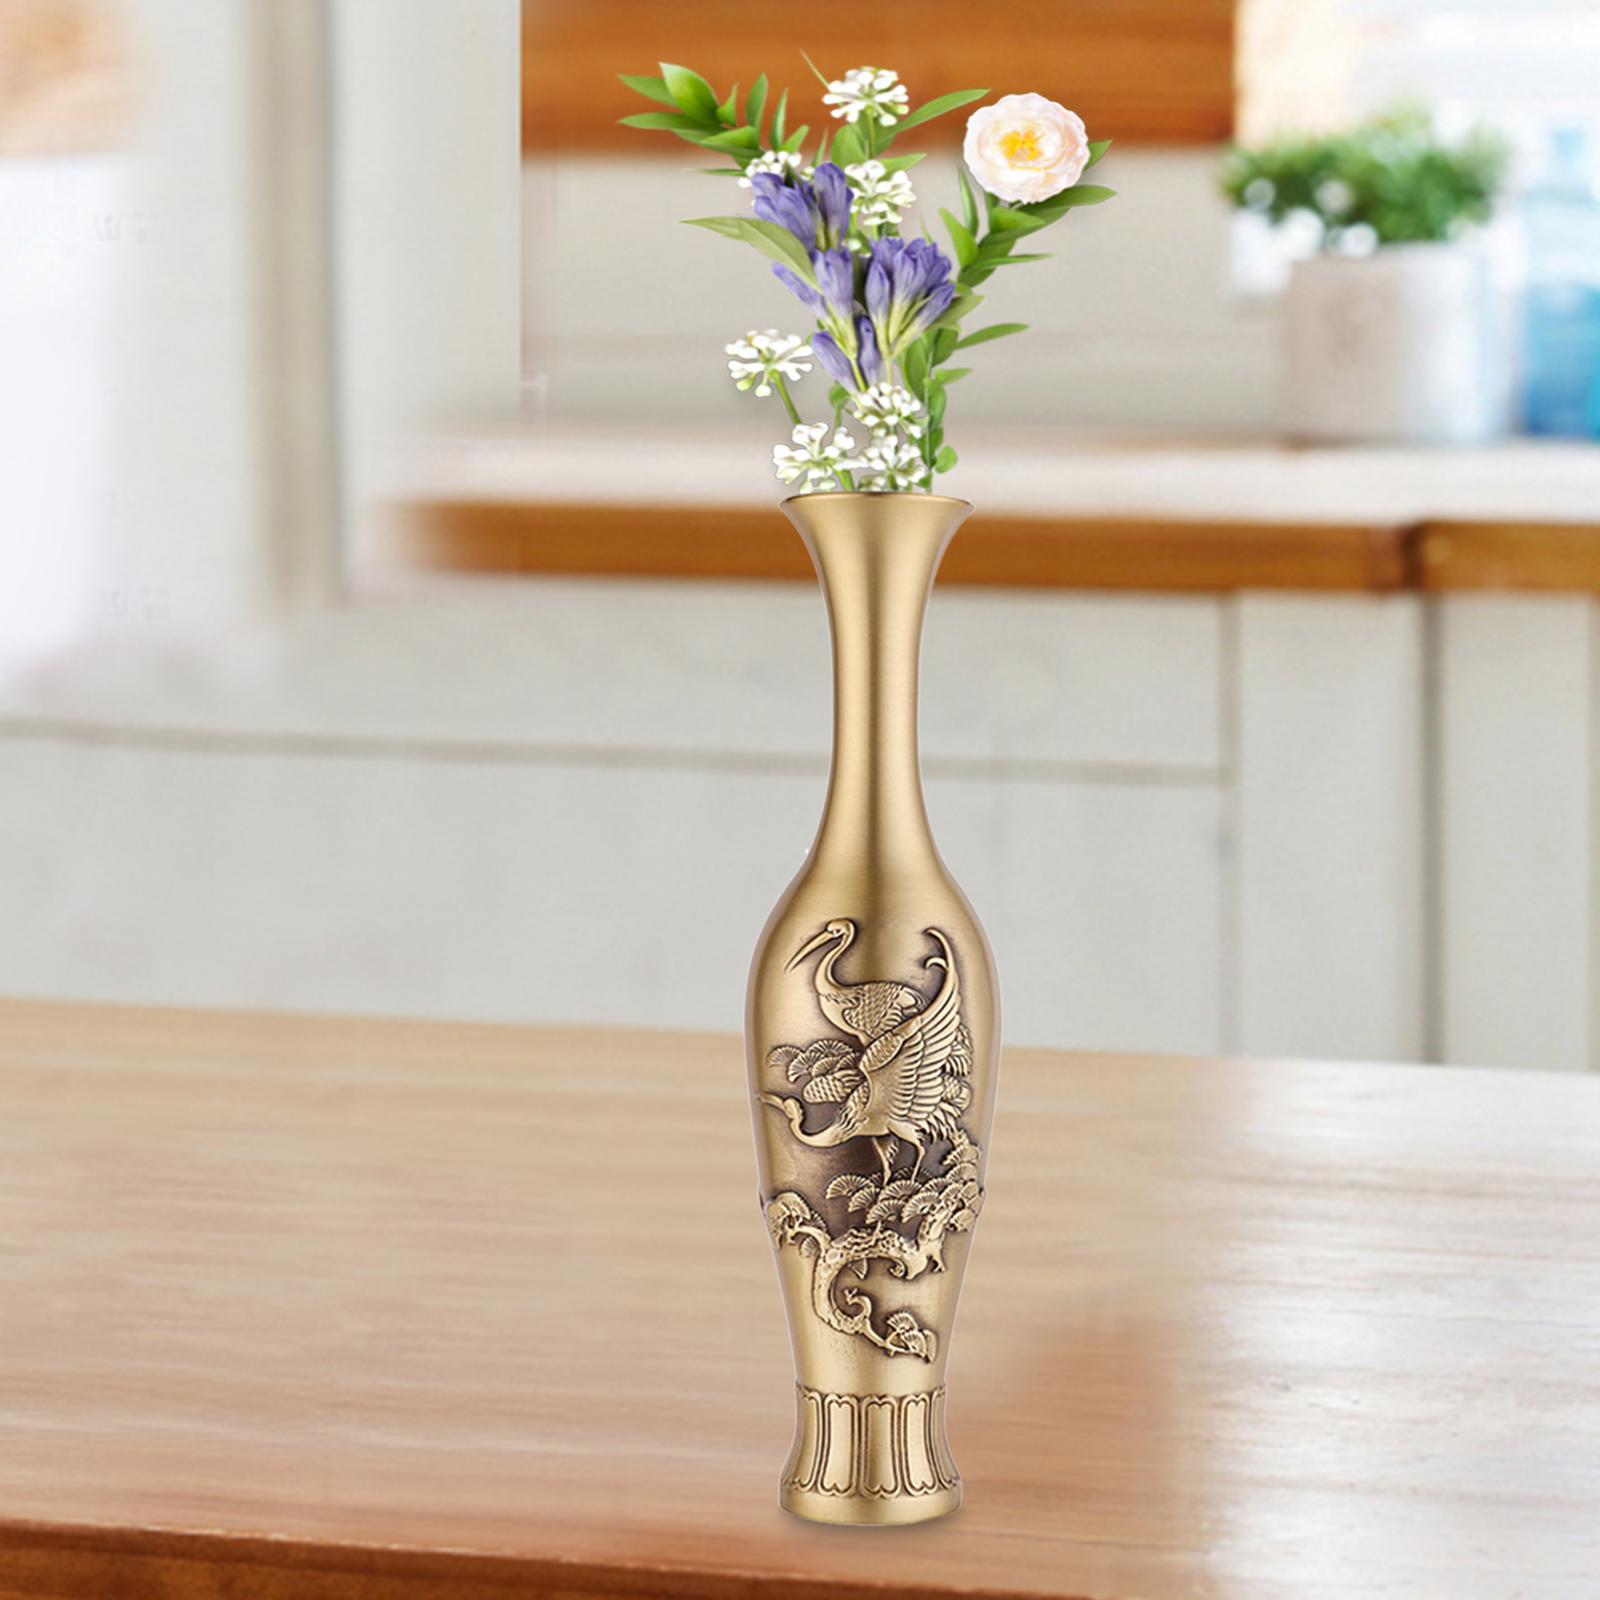 Handcrafted Brass Vase Artistic Tabletop Vases for Home Entryway Decoration